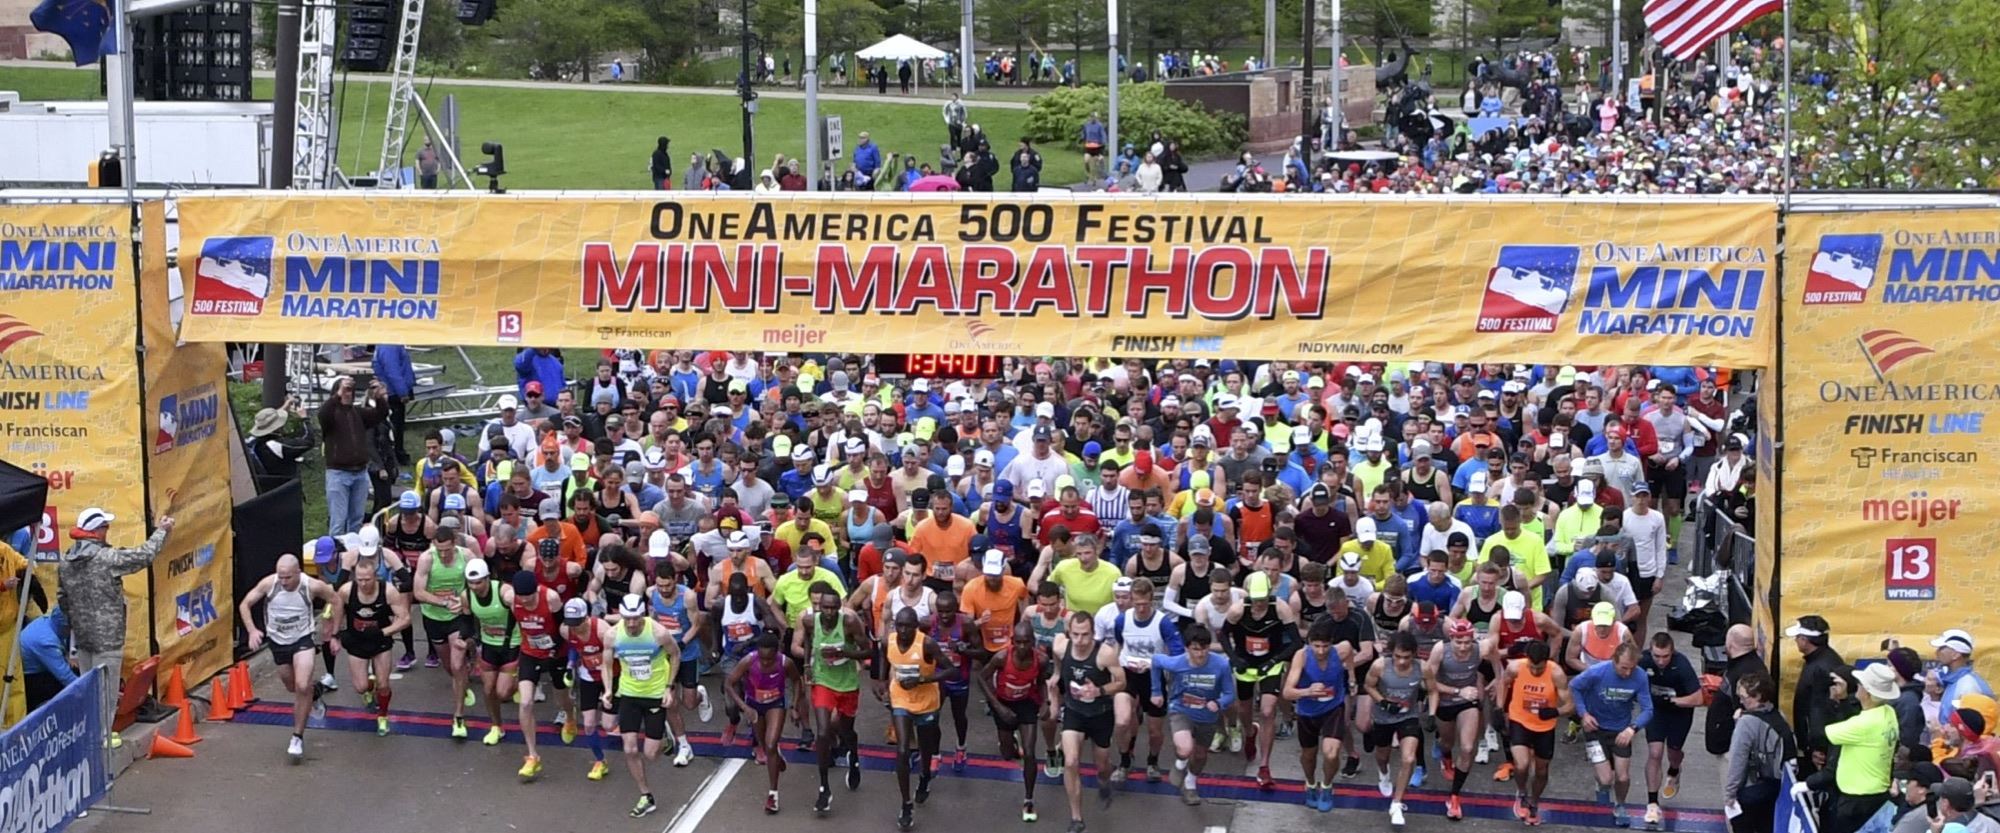 Runners cross the starting line at the One America 500 Festival Mini-Marathon which kicks off the Month of May.